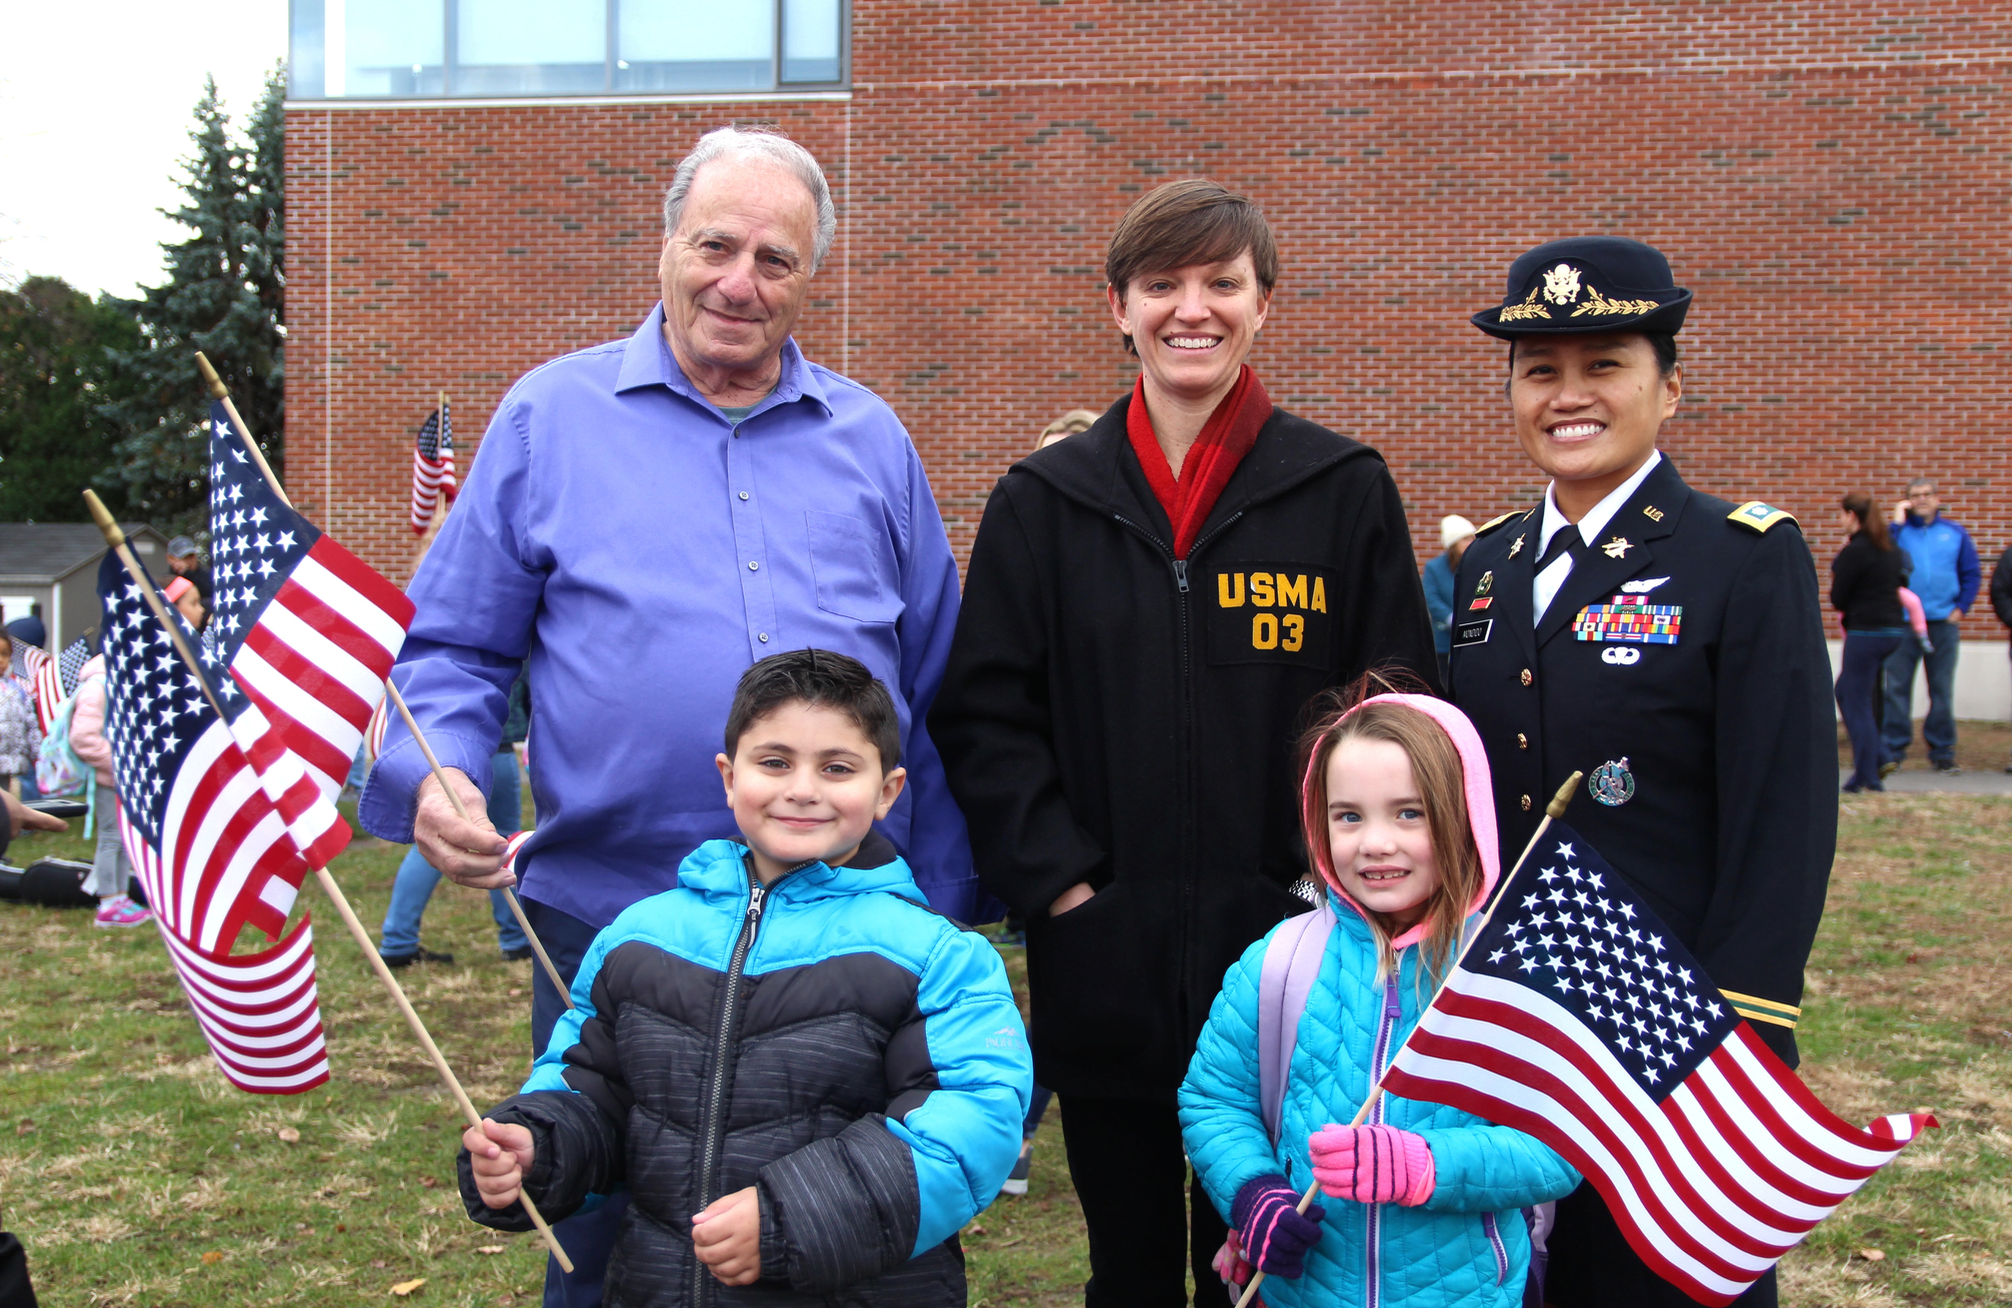 Salvatore Servello, who served in the Air Force 1957-1961, Sarah Haag-Fisk a 2nd Lieutenant in the US Army and LtCol Jennifer Mondido at Hamilton Avenue School on Nov 9, 2018 Photo: Leslie Yager